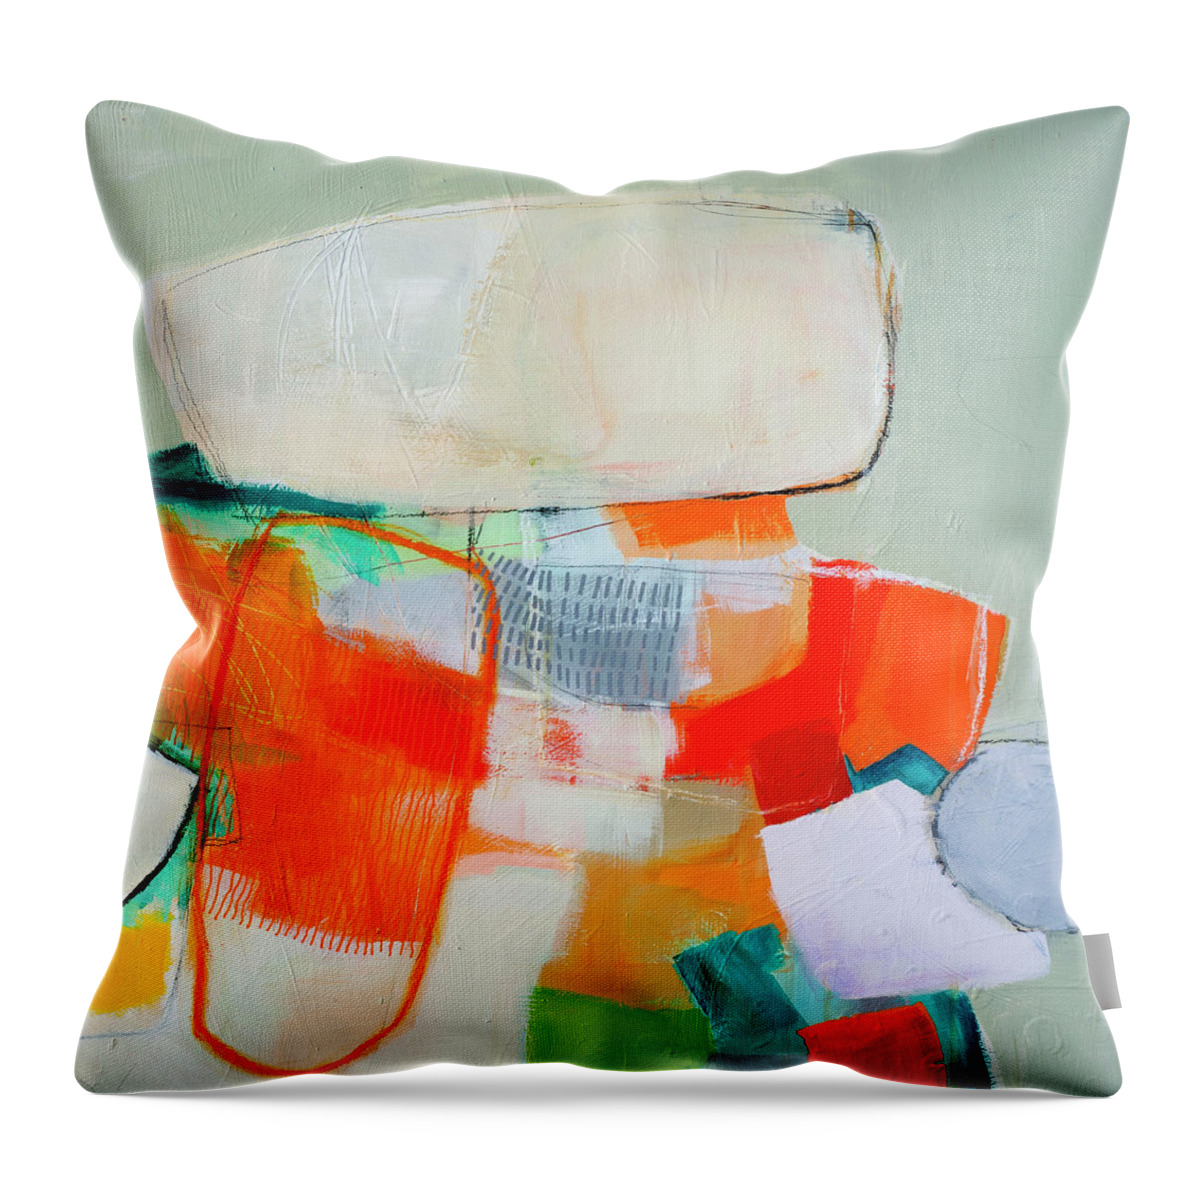 Abstract Art Throw Pillow featuring the painting Geologic Time by Jane Davies